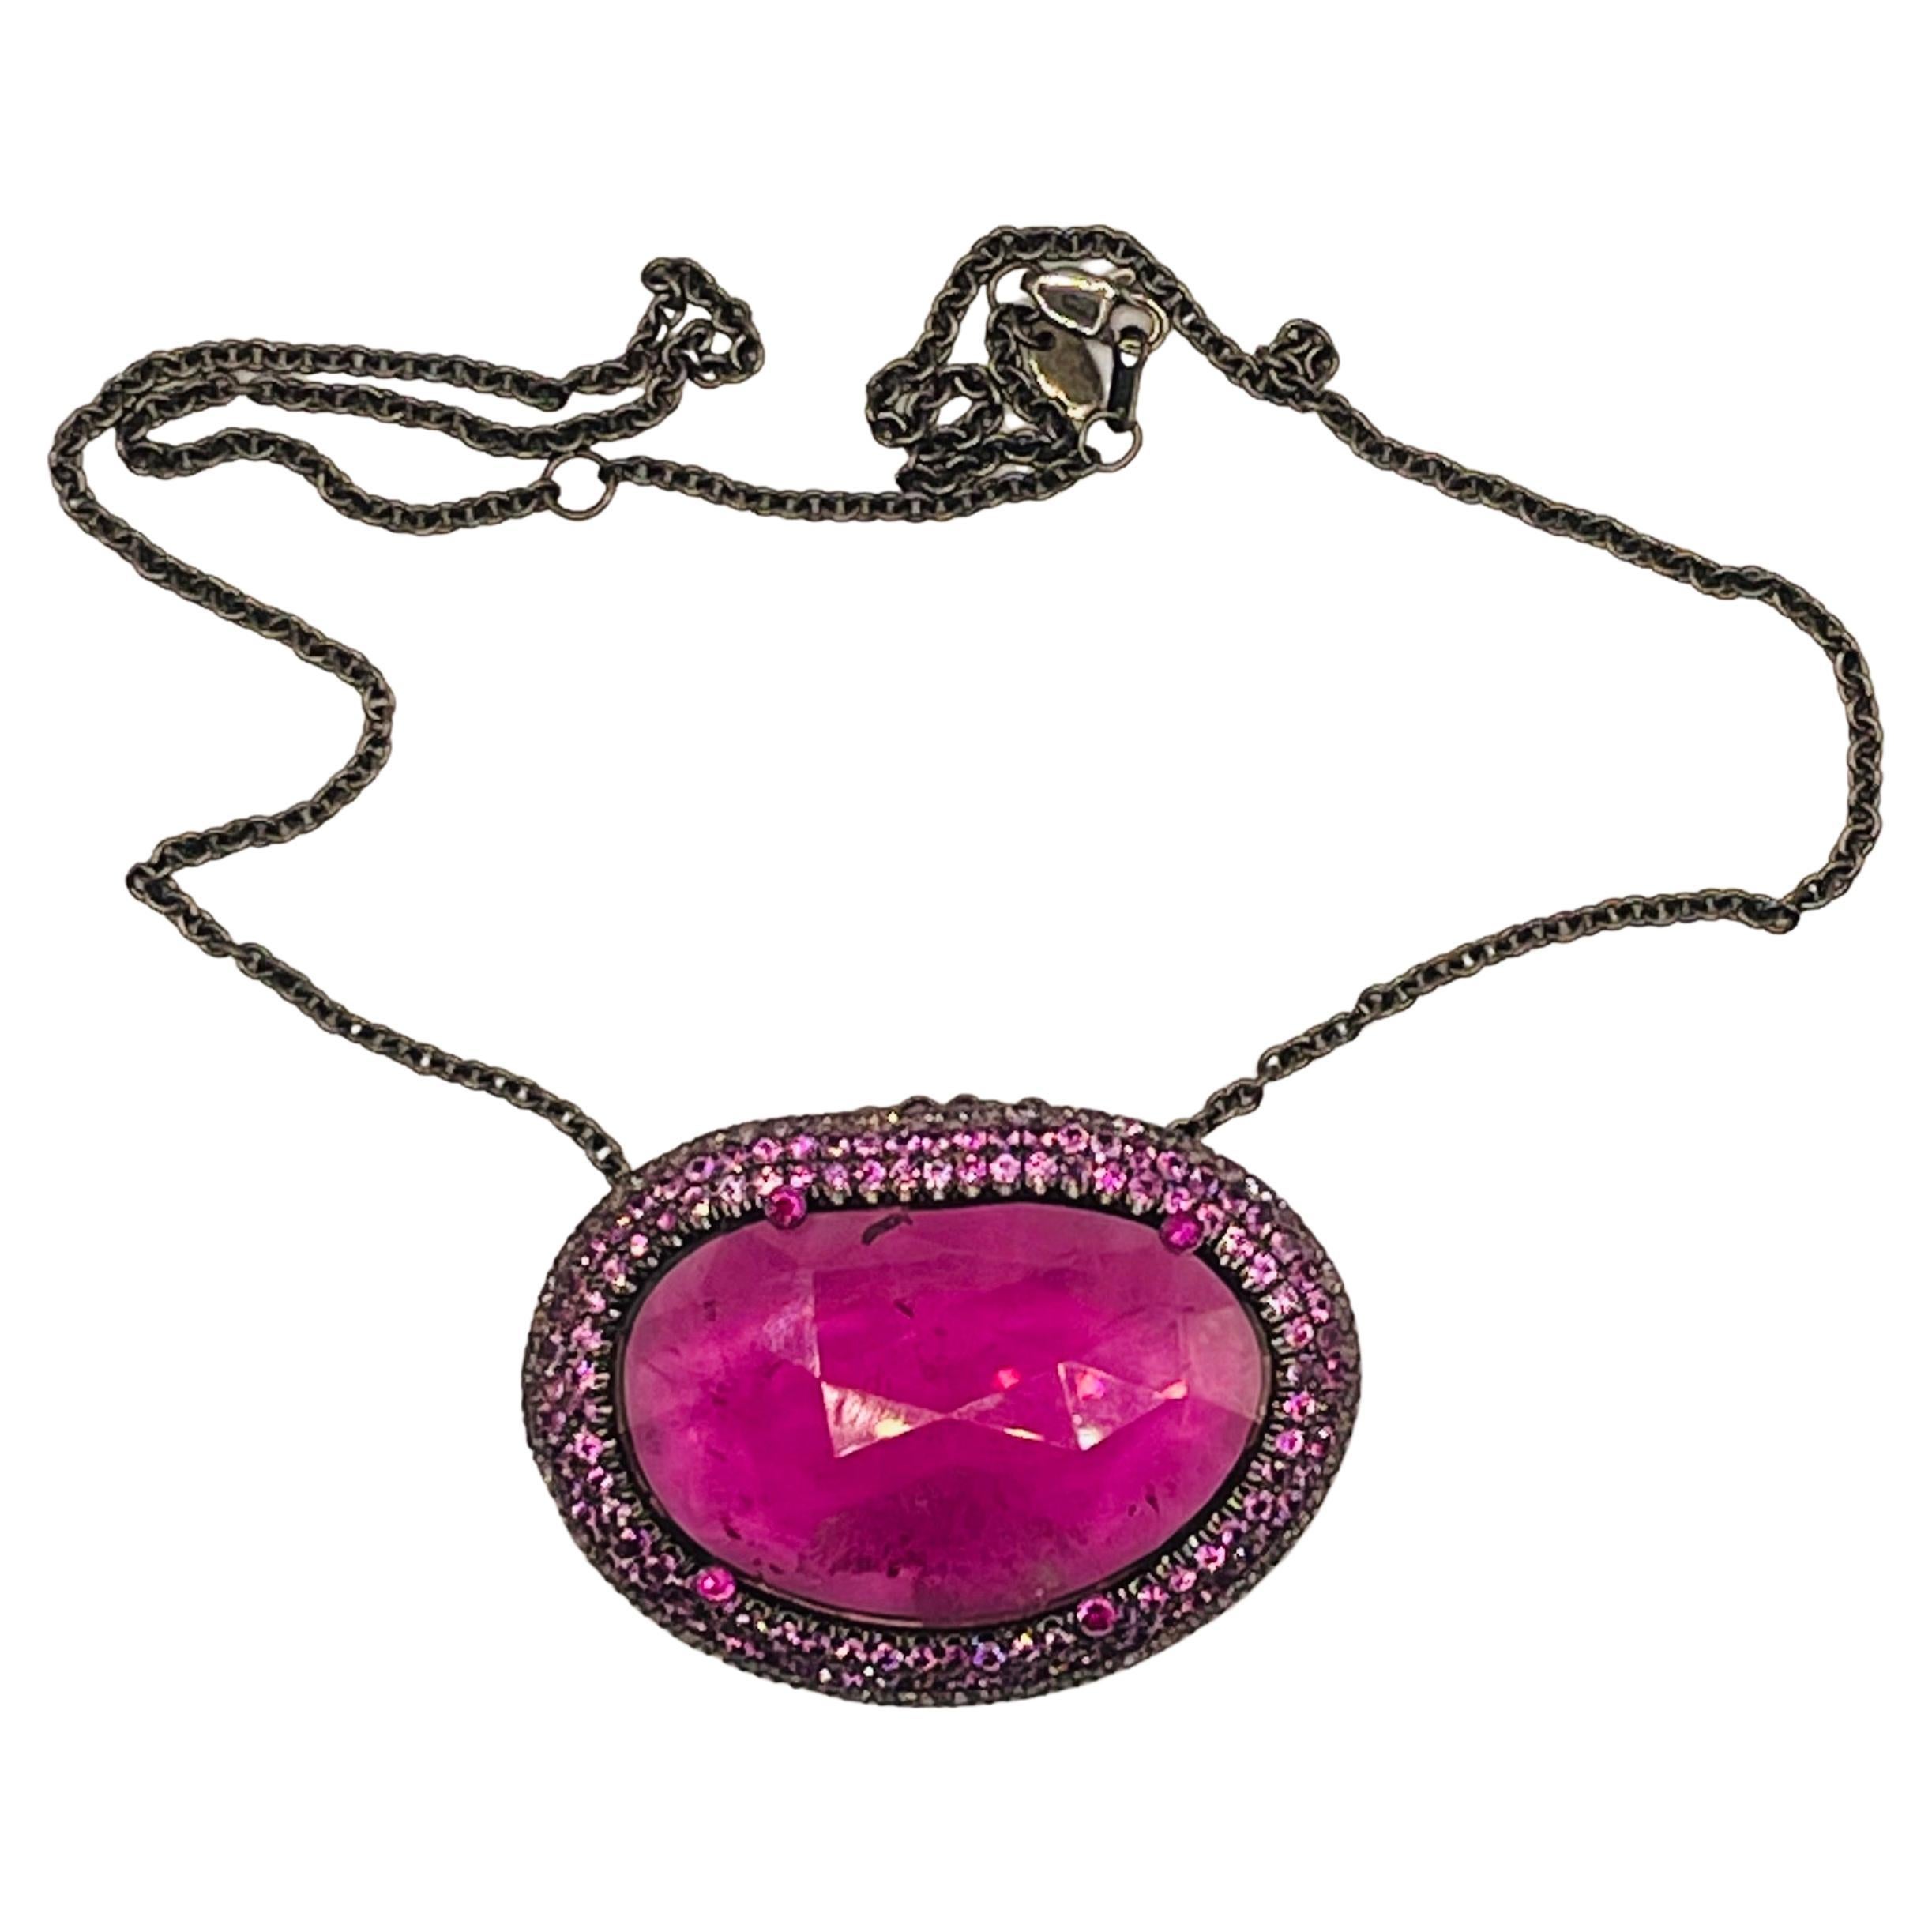 Pink Tourmaline and Pink Sapphiers Necklace Byjulia Shlovsky For Sale